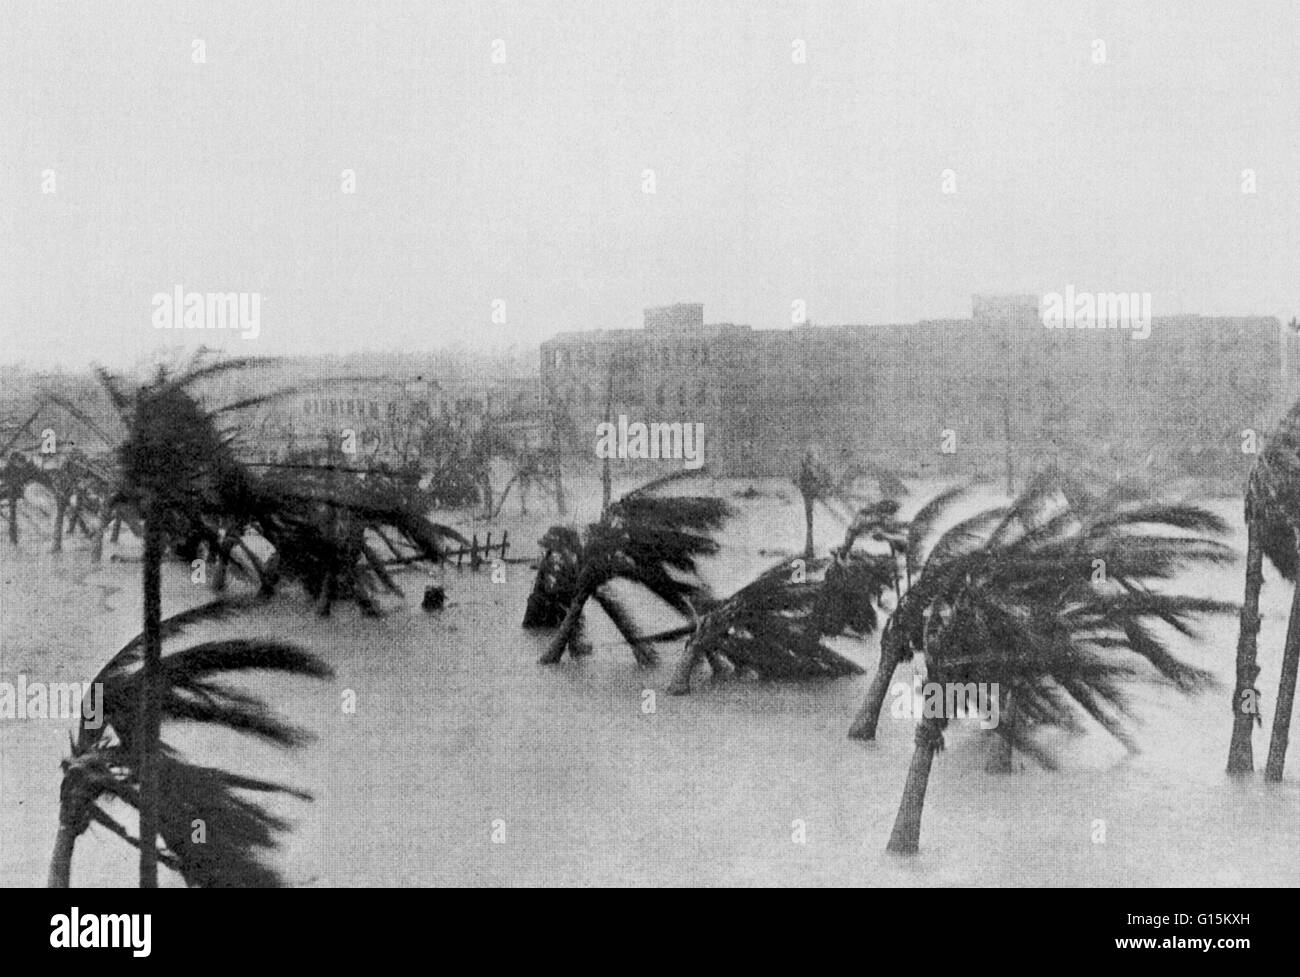 Miami at the height of the 1926 hurricane, known as the Great Miami Hurricane. The storm was a category 4 and caused significant damage in the Florida Panhandle, Alabama, and the Bahamas. Stock Photo